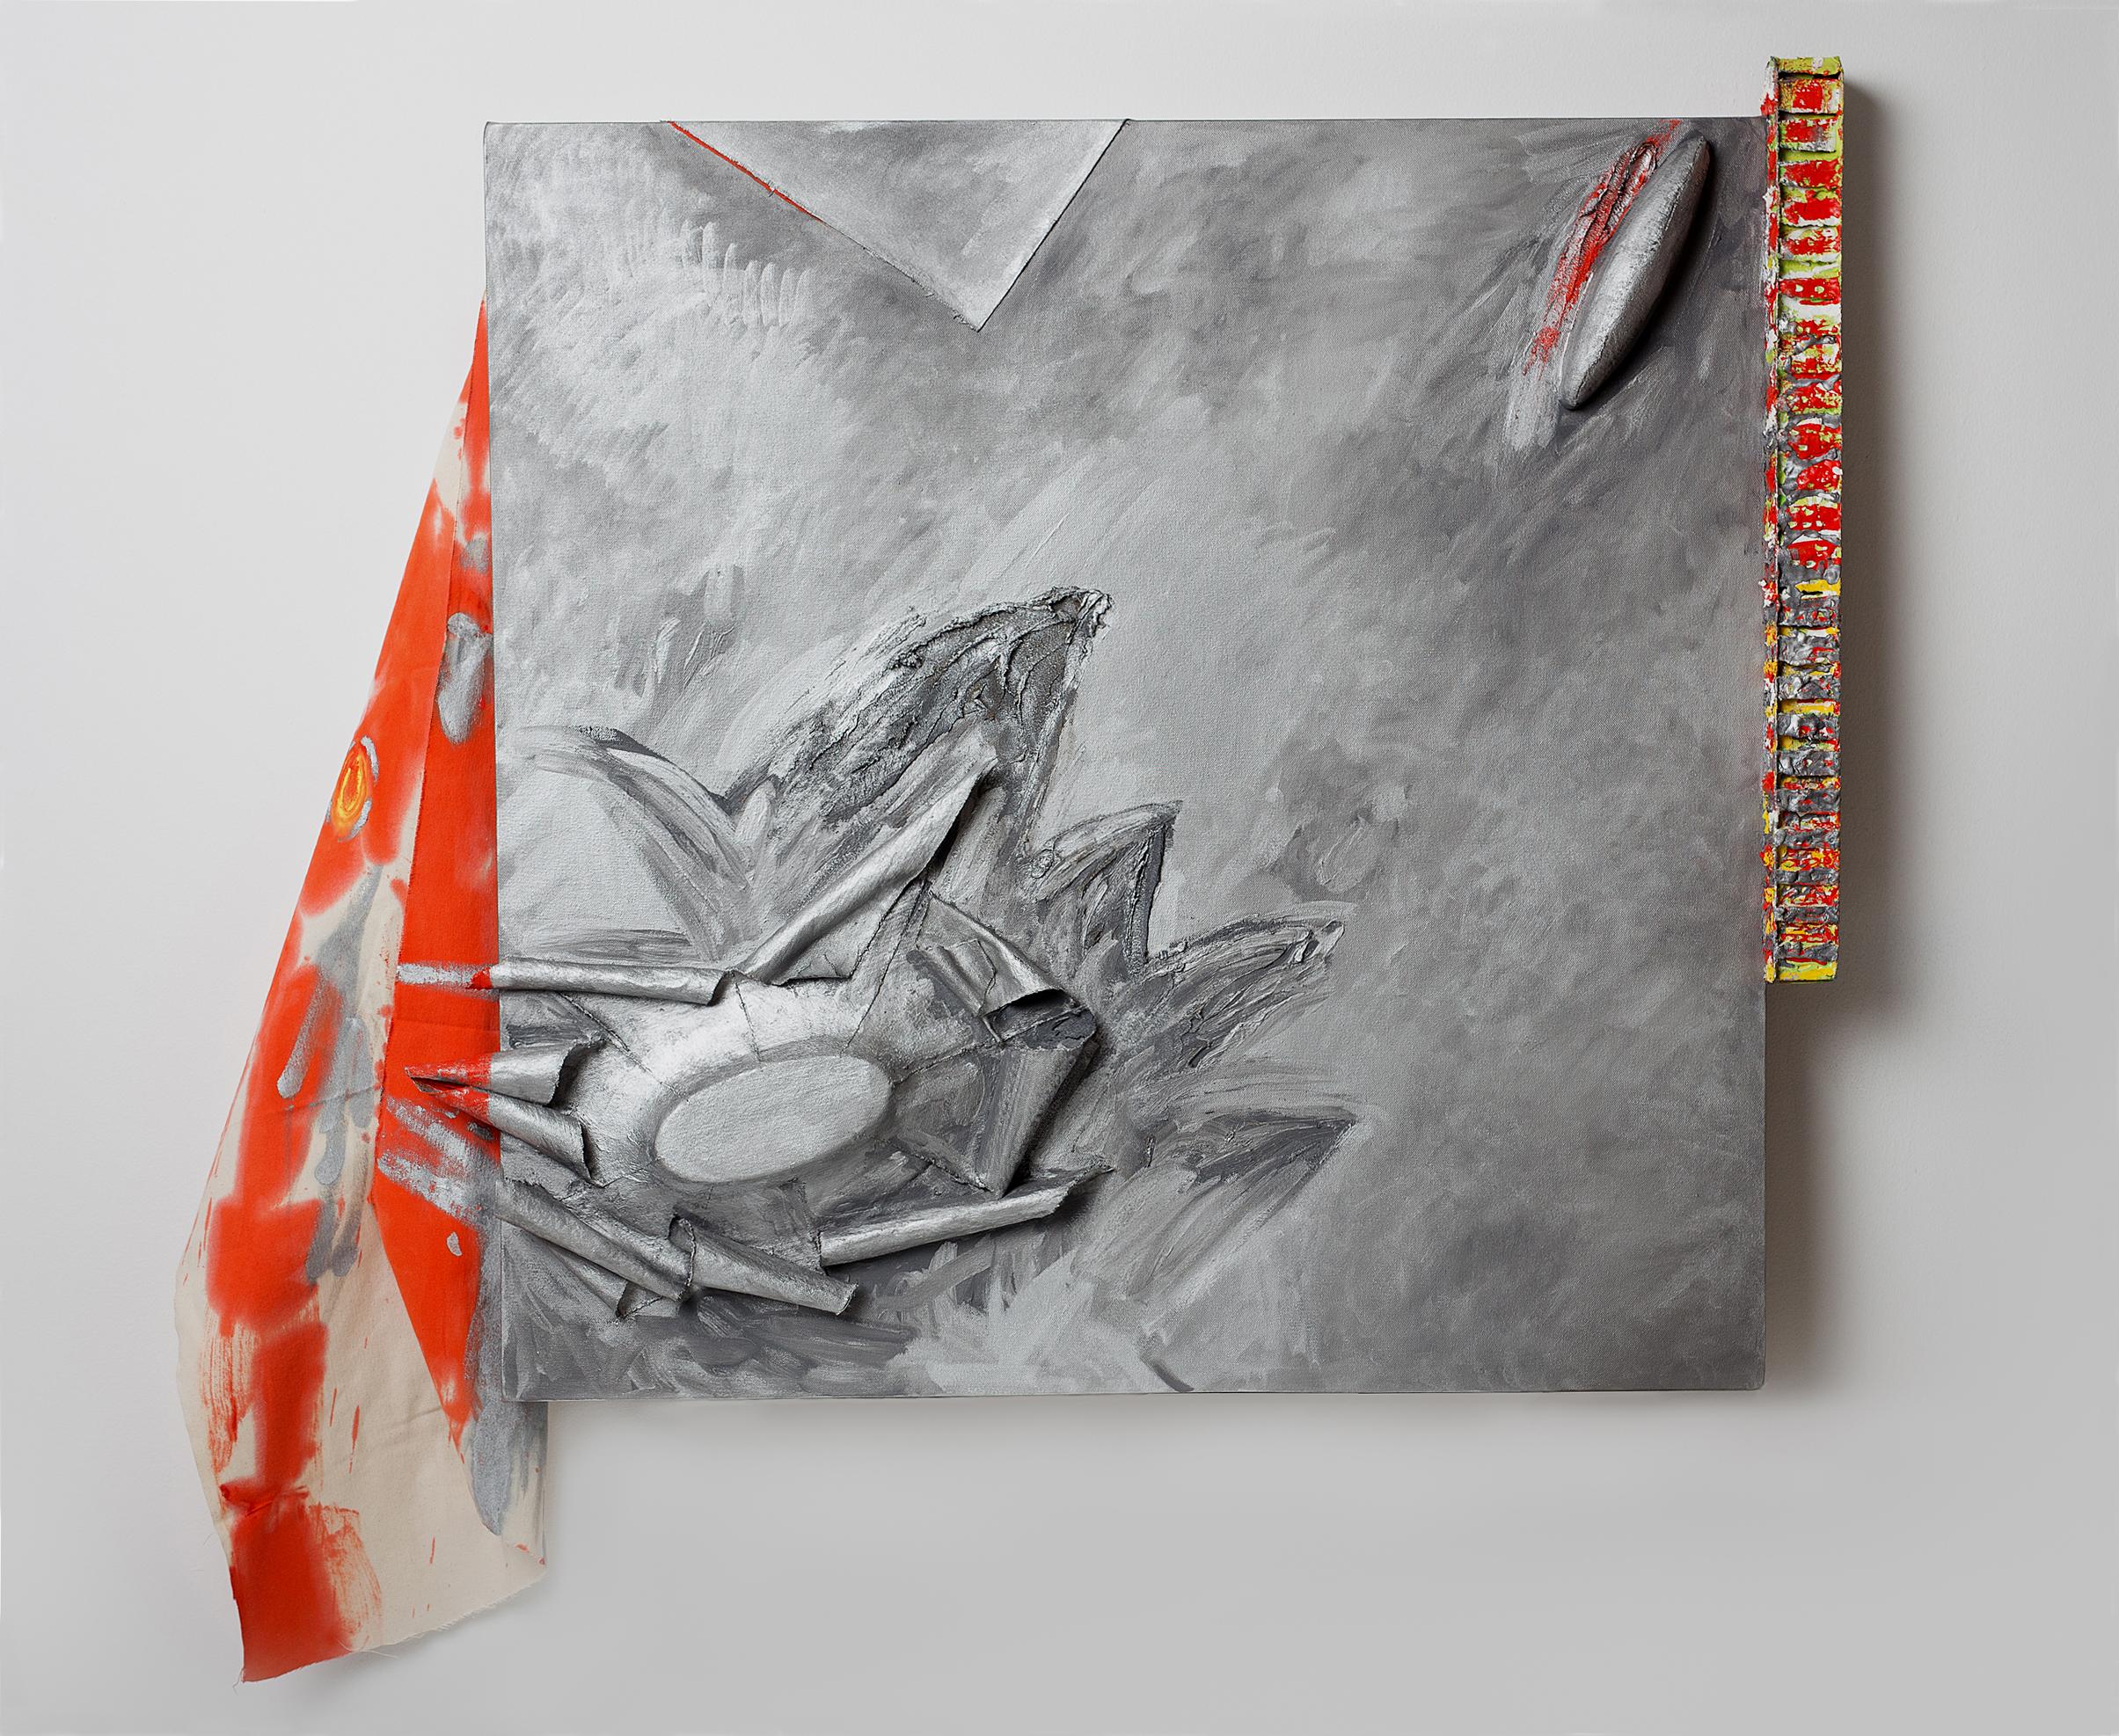 Marilyn Davidson Abstract Painting - "Turbine", painted in silvery metallic aluminum and fiery oranges